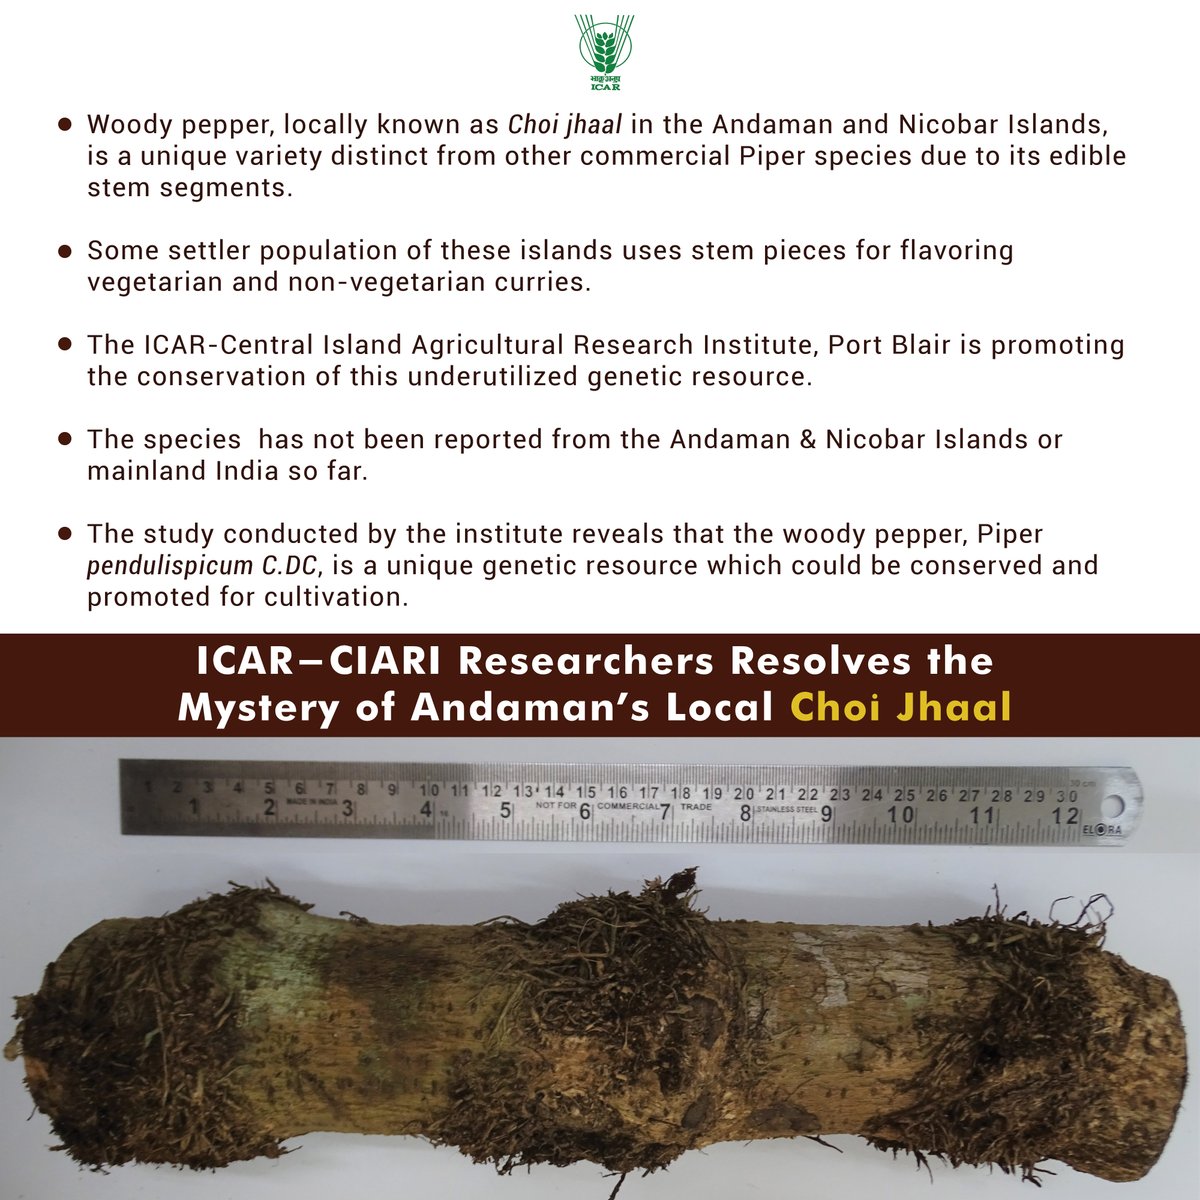 #ICAR-CIARI Researchers Resolves the Mystery of Andaman’s Local Choi Jhaal: DNA Barcoding revealed as New Species for Indian Flora. #ICAR #Agriculture #farming @PMOIndia @mygovindia @PIB_India @AgriGoI @DDKisanChannel @Dept_of_AHD Red more: icar.org.in/node/20886